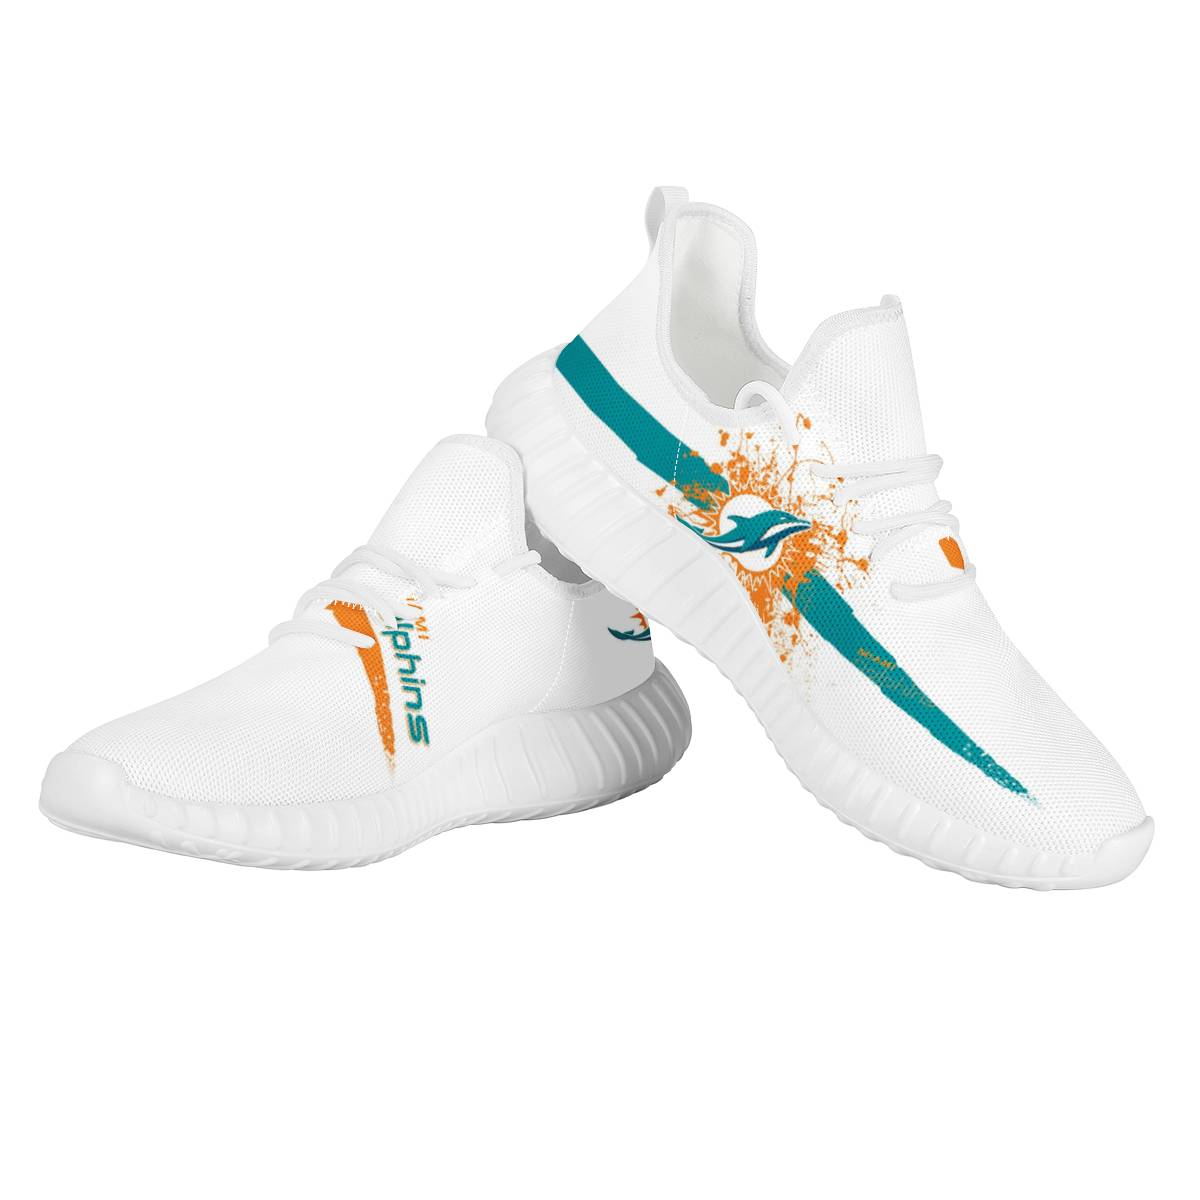 Women's Miami Dolphins Mesh Knit Sneakers/Shoes 013